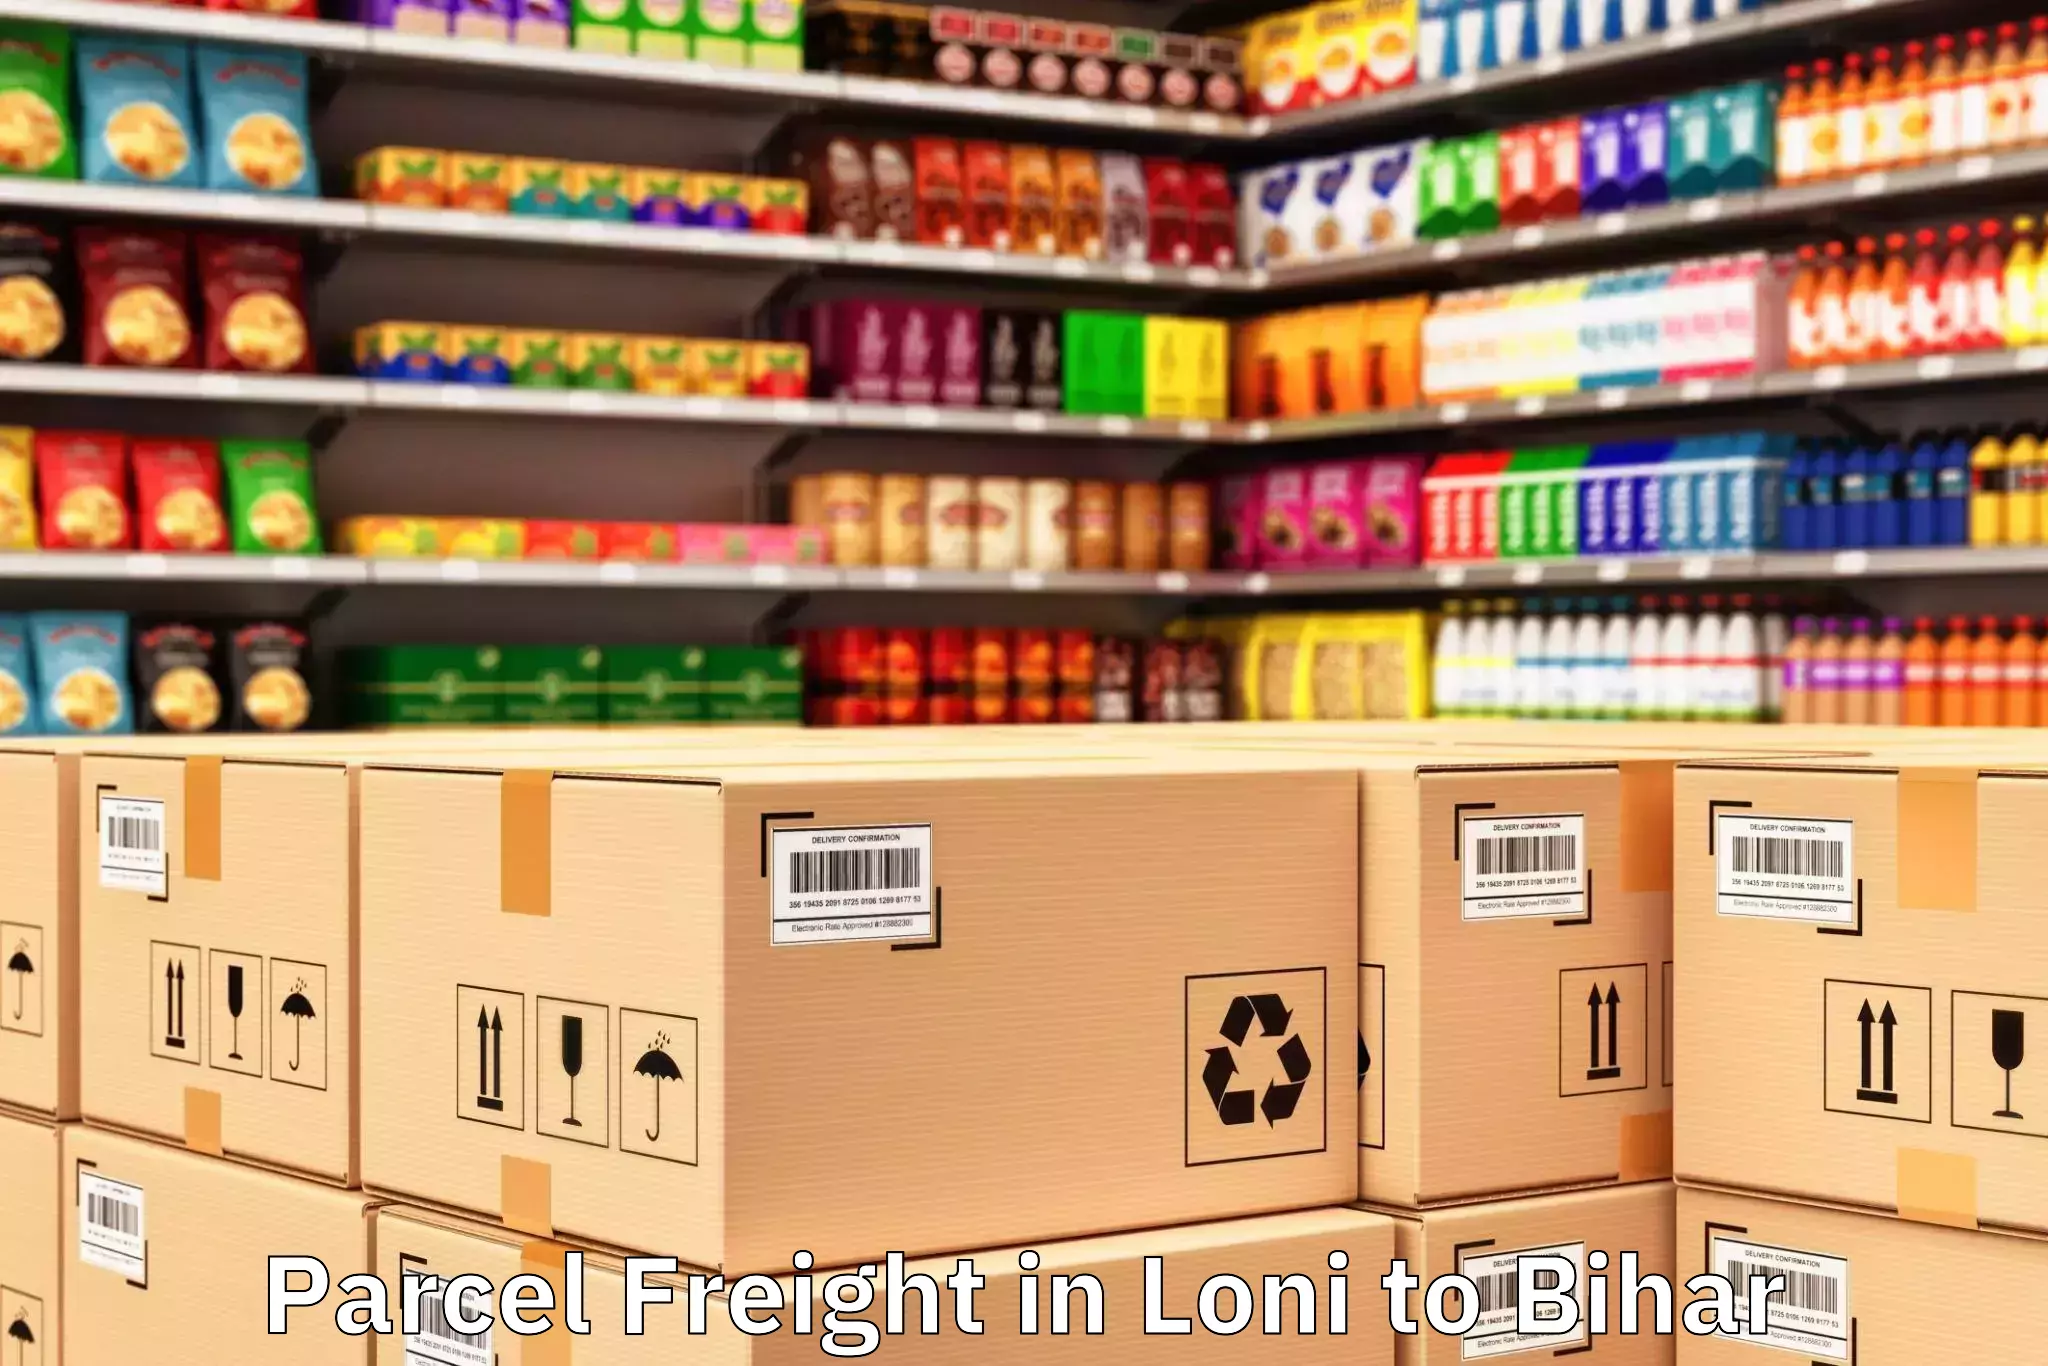 Top Loni to Bihar Parcel Freight Available